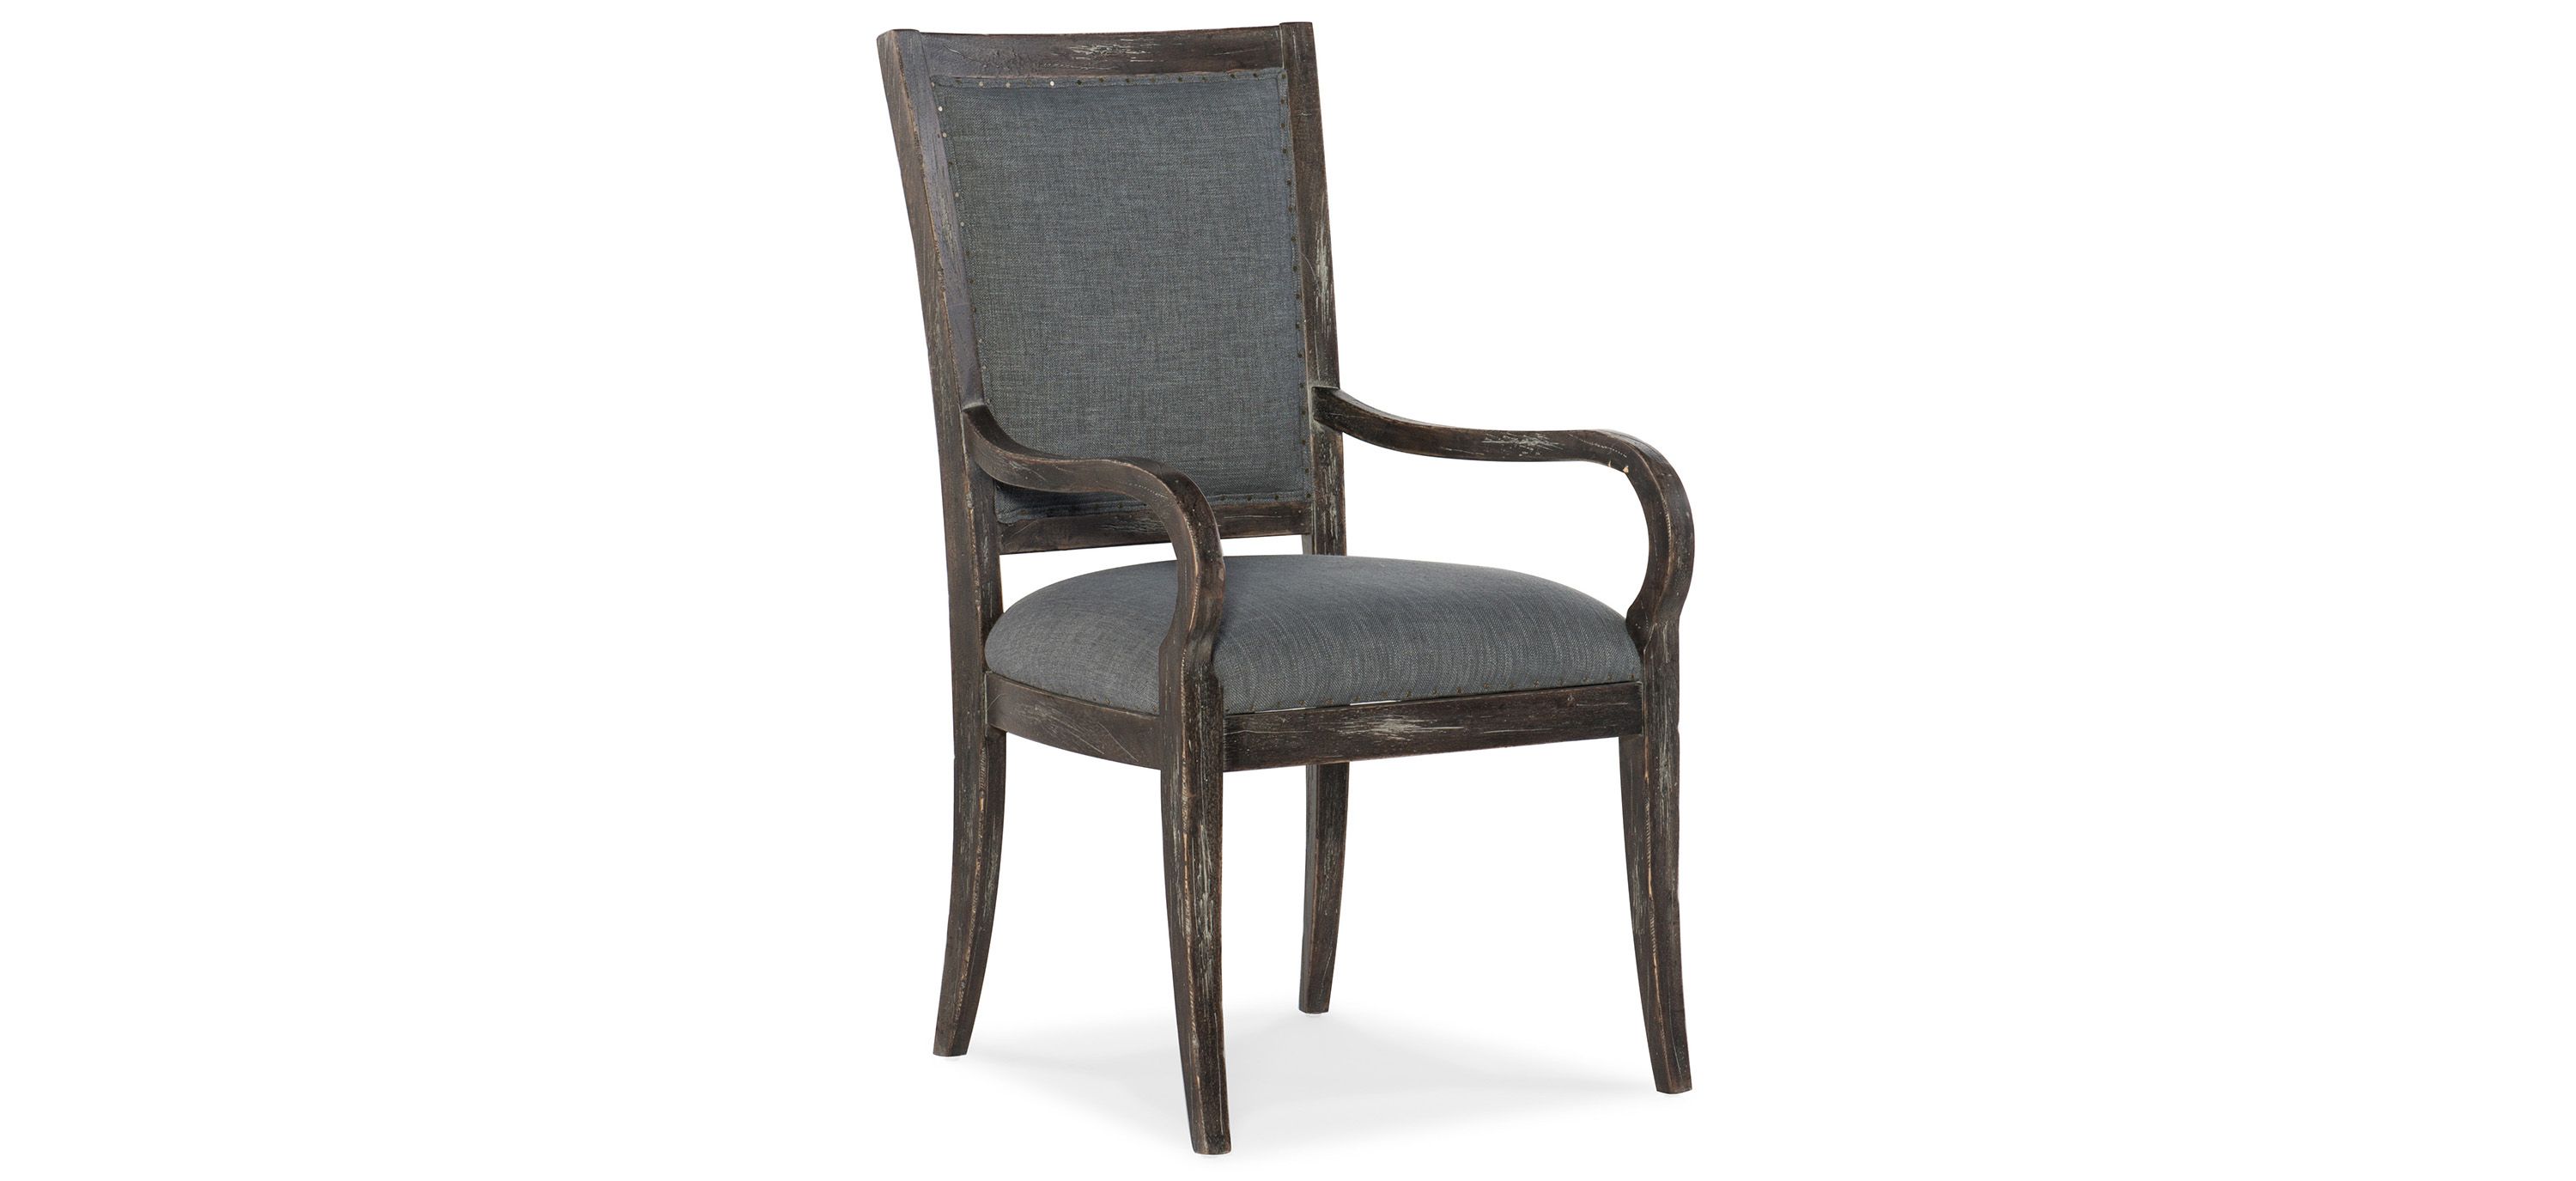 Beaumont Upholstered Arm Chair - Set of 2